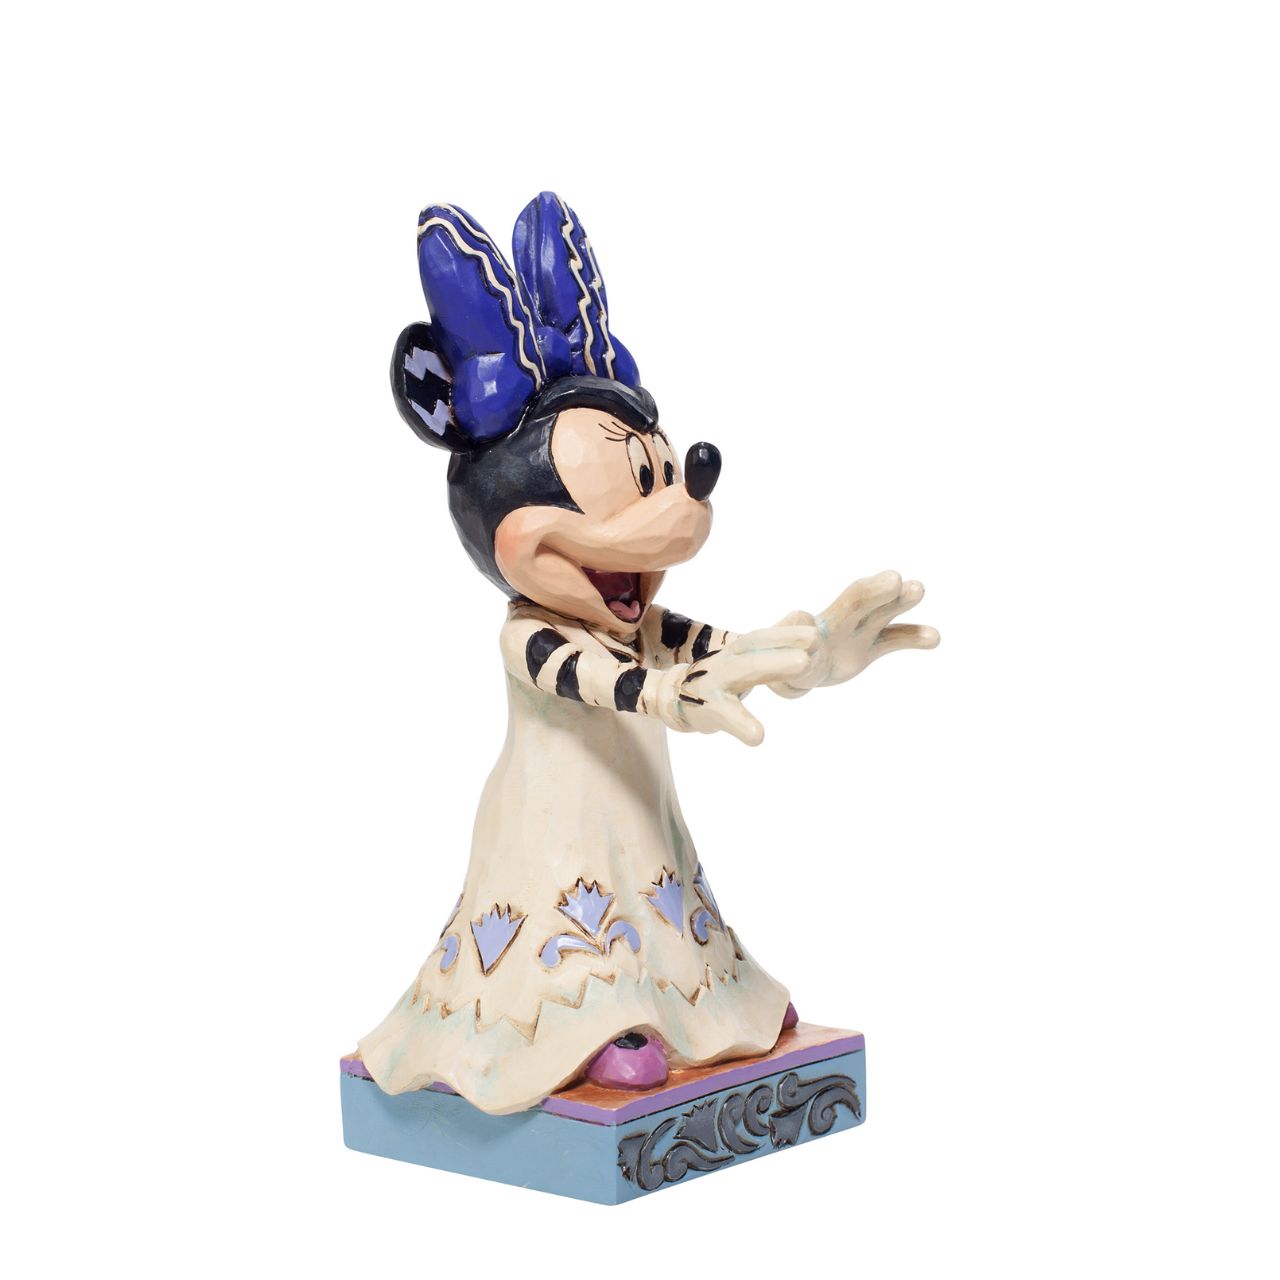 Jim Shore Disney Scream Queen Halloween Minnie Mouse Figurine  Dressed in ghoulish costume, Minnie the un-dead mouse staggers towards you! With a frightening hairdo and mischievous grin, she'll scare you out of your socks. Celebrate the spookiest time of the year with your Disney favourites by Jim Shore